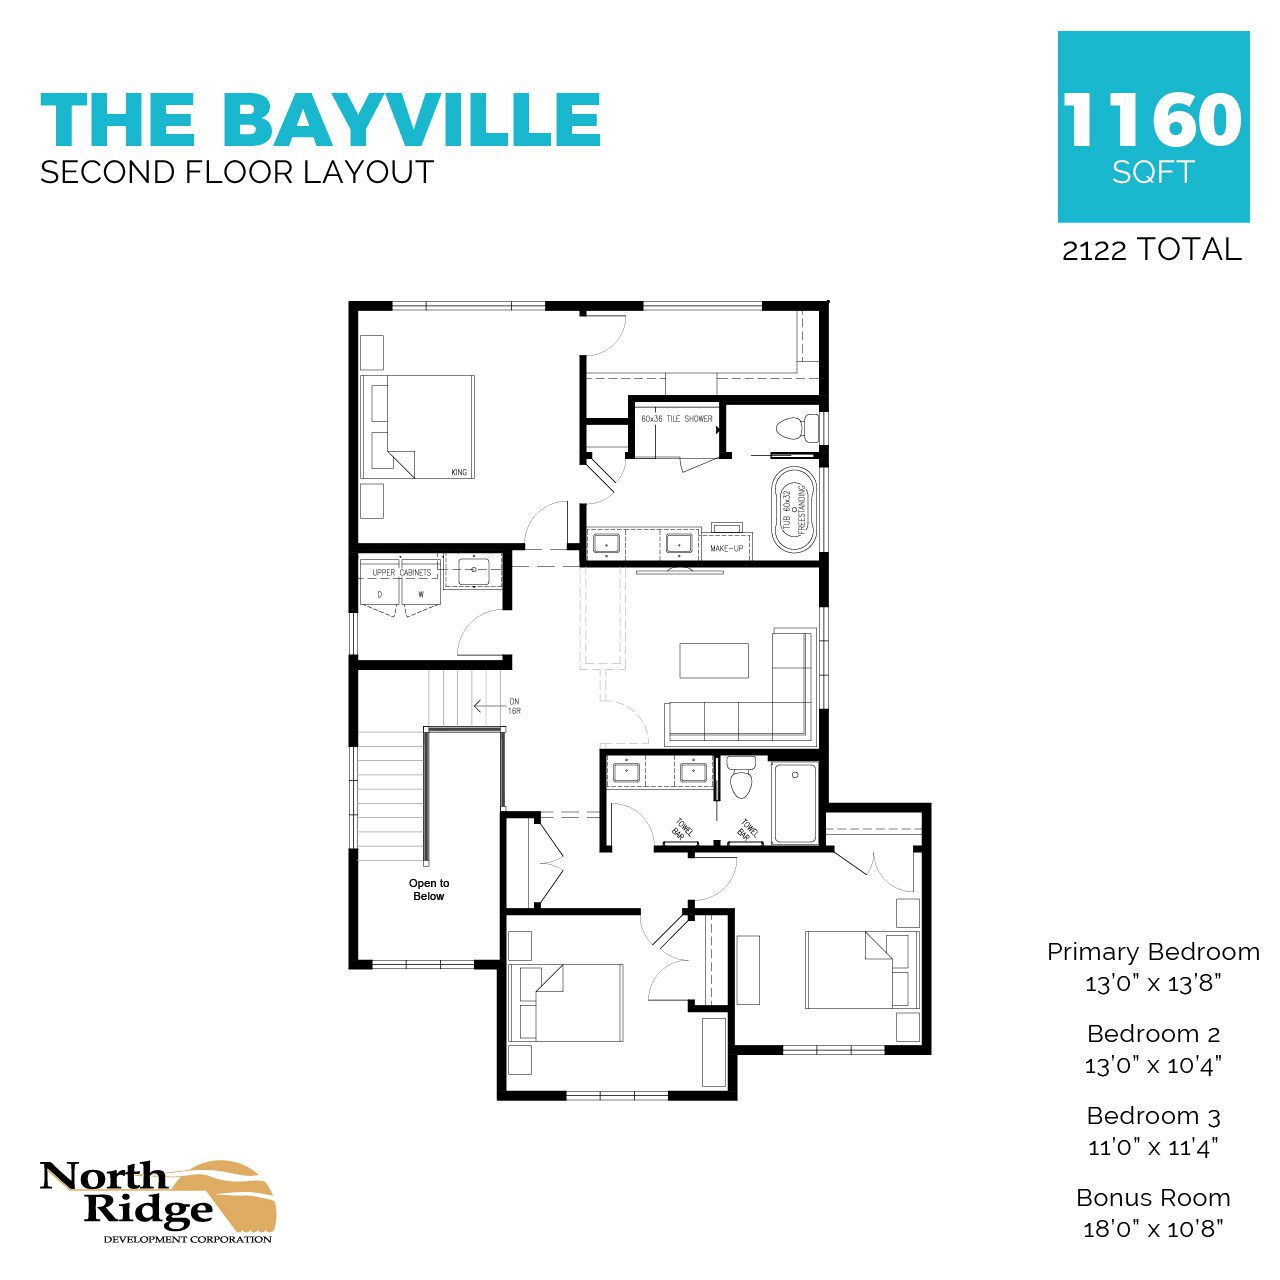 Shows second floor layout with 3 bedrooms, two bathrooms, upstairs laundry and bonus room.